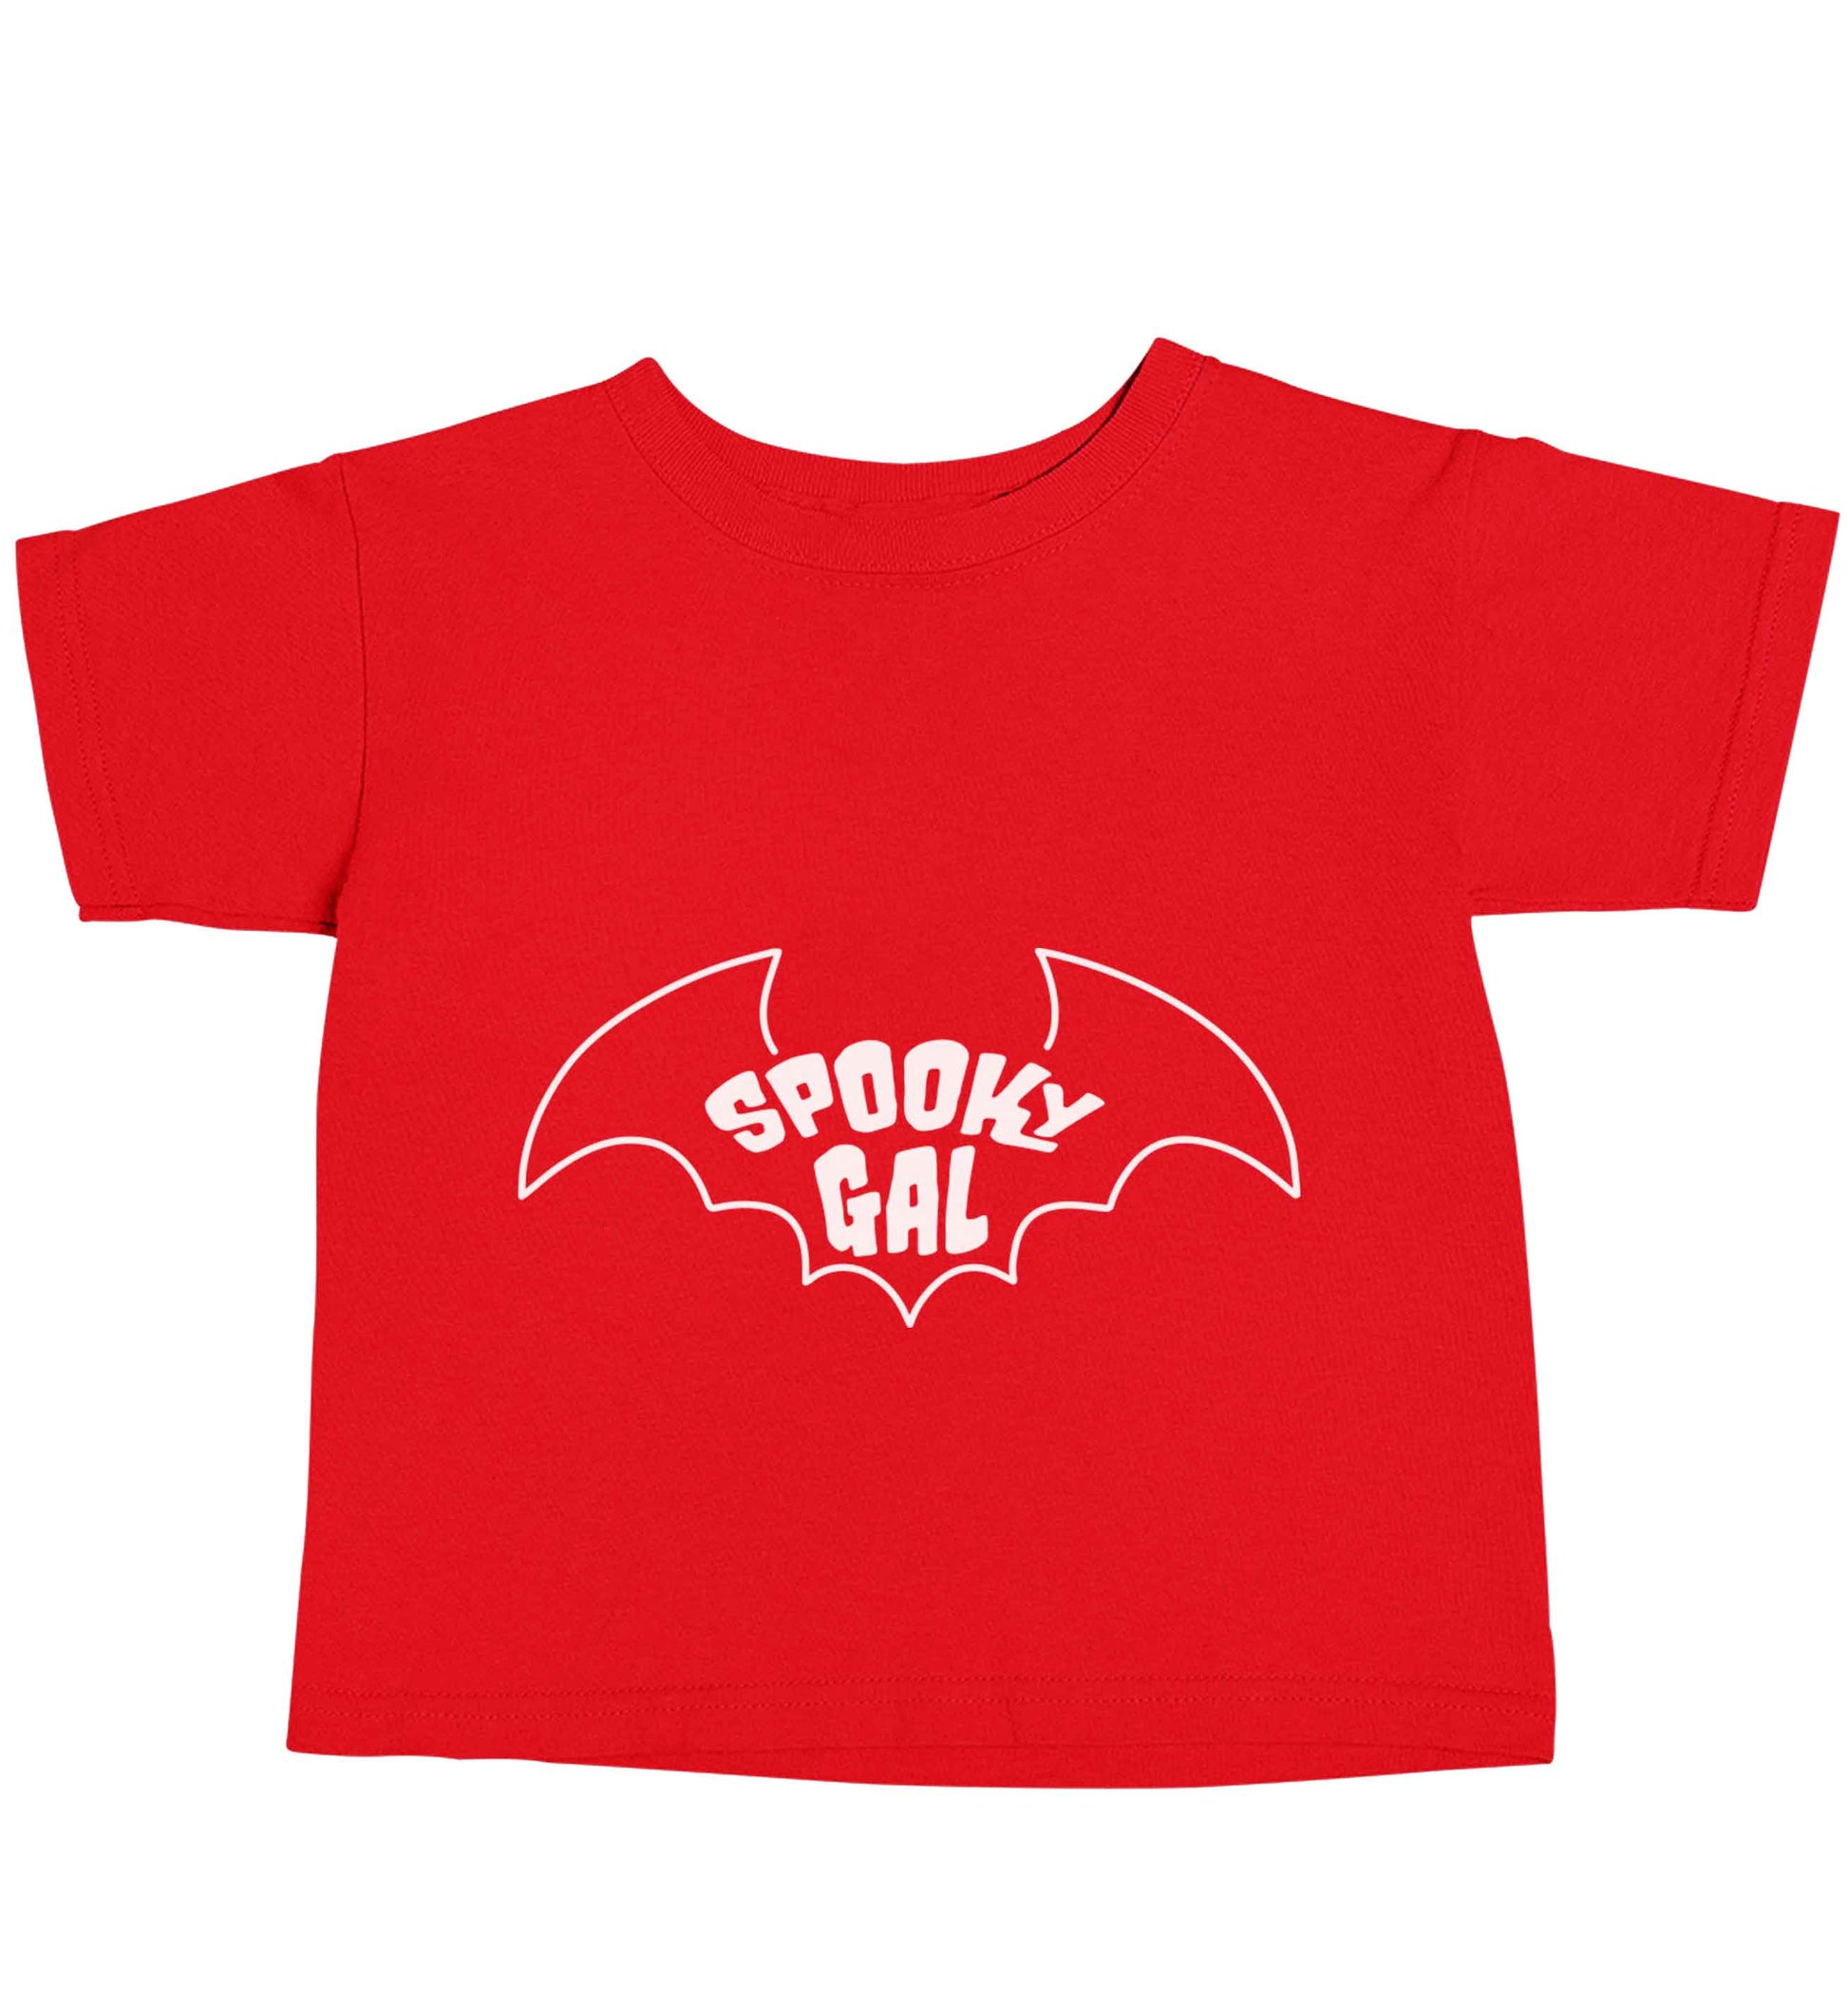 Spooky gal Kit red baby toddler Tshirt 2 Years